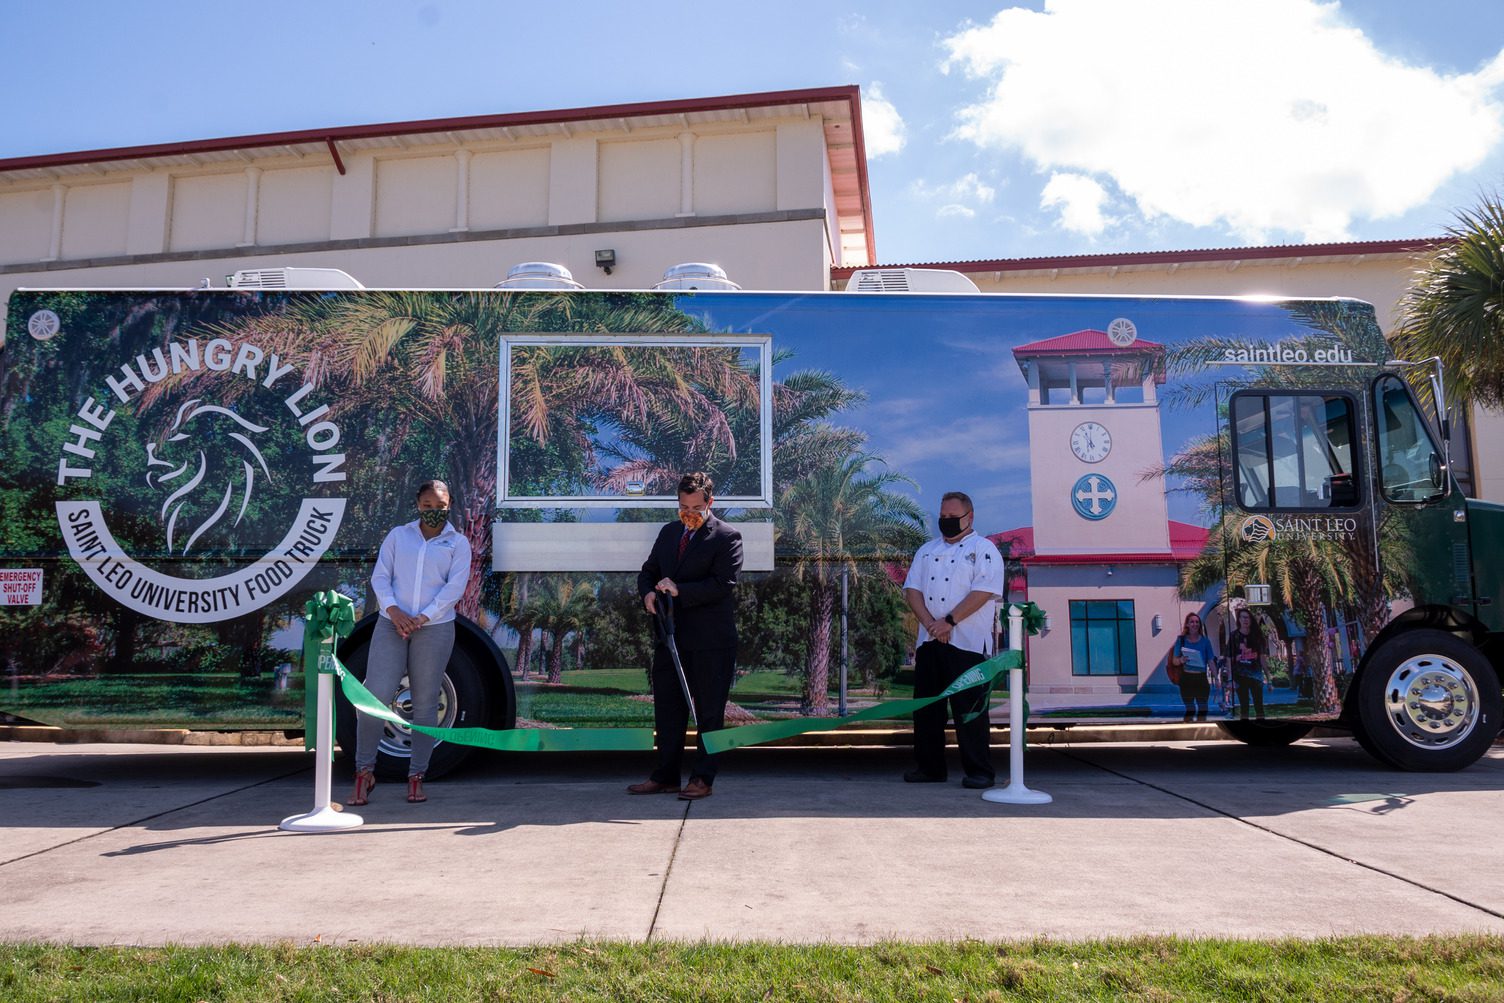 Saint Leo University President Jeffrey Senese (center), alongside Student Government Union President Ashley Butler (left) and Director of Dining Services Justin Bush (right), cut the ribbon signifying the opening of The Hungry Lion food truck.